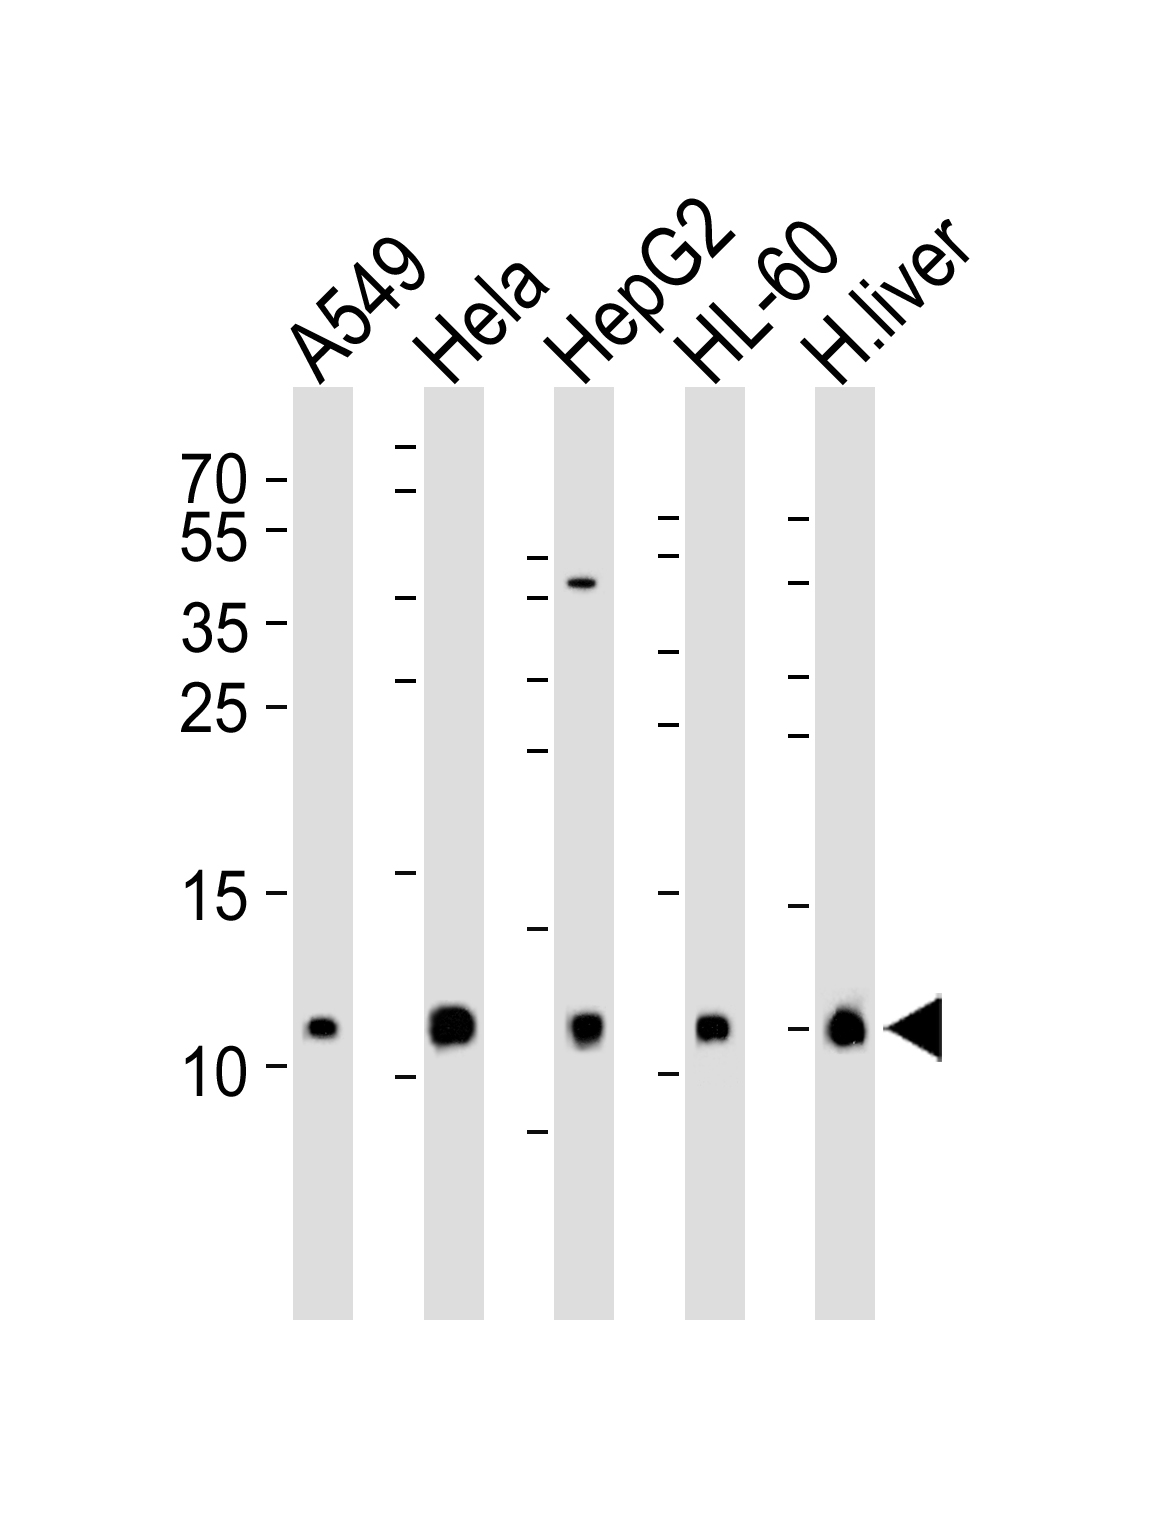 COX6B1 Antibody - N-terminal (OAAB18146) in A549, Hela, HepG2, HL-60 cell line and human liver tissue lysate (from left to right) using Western Blot